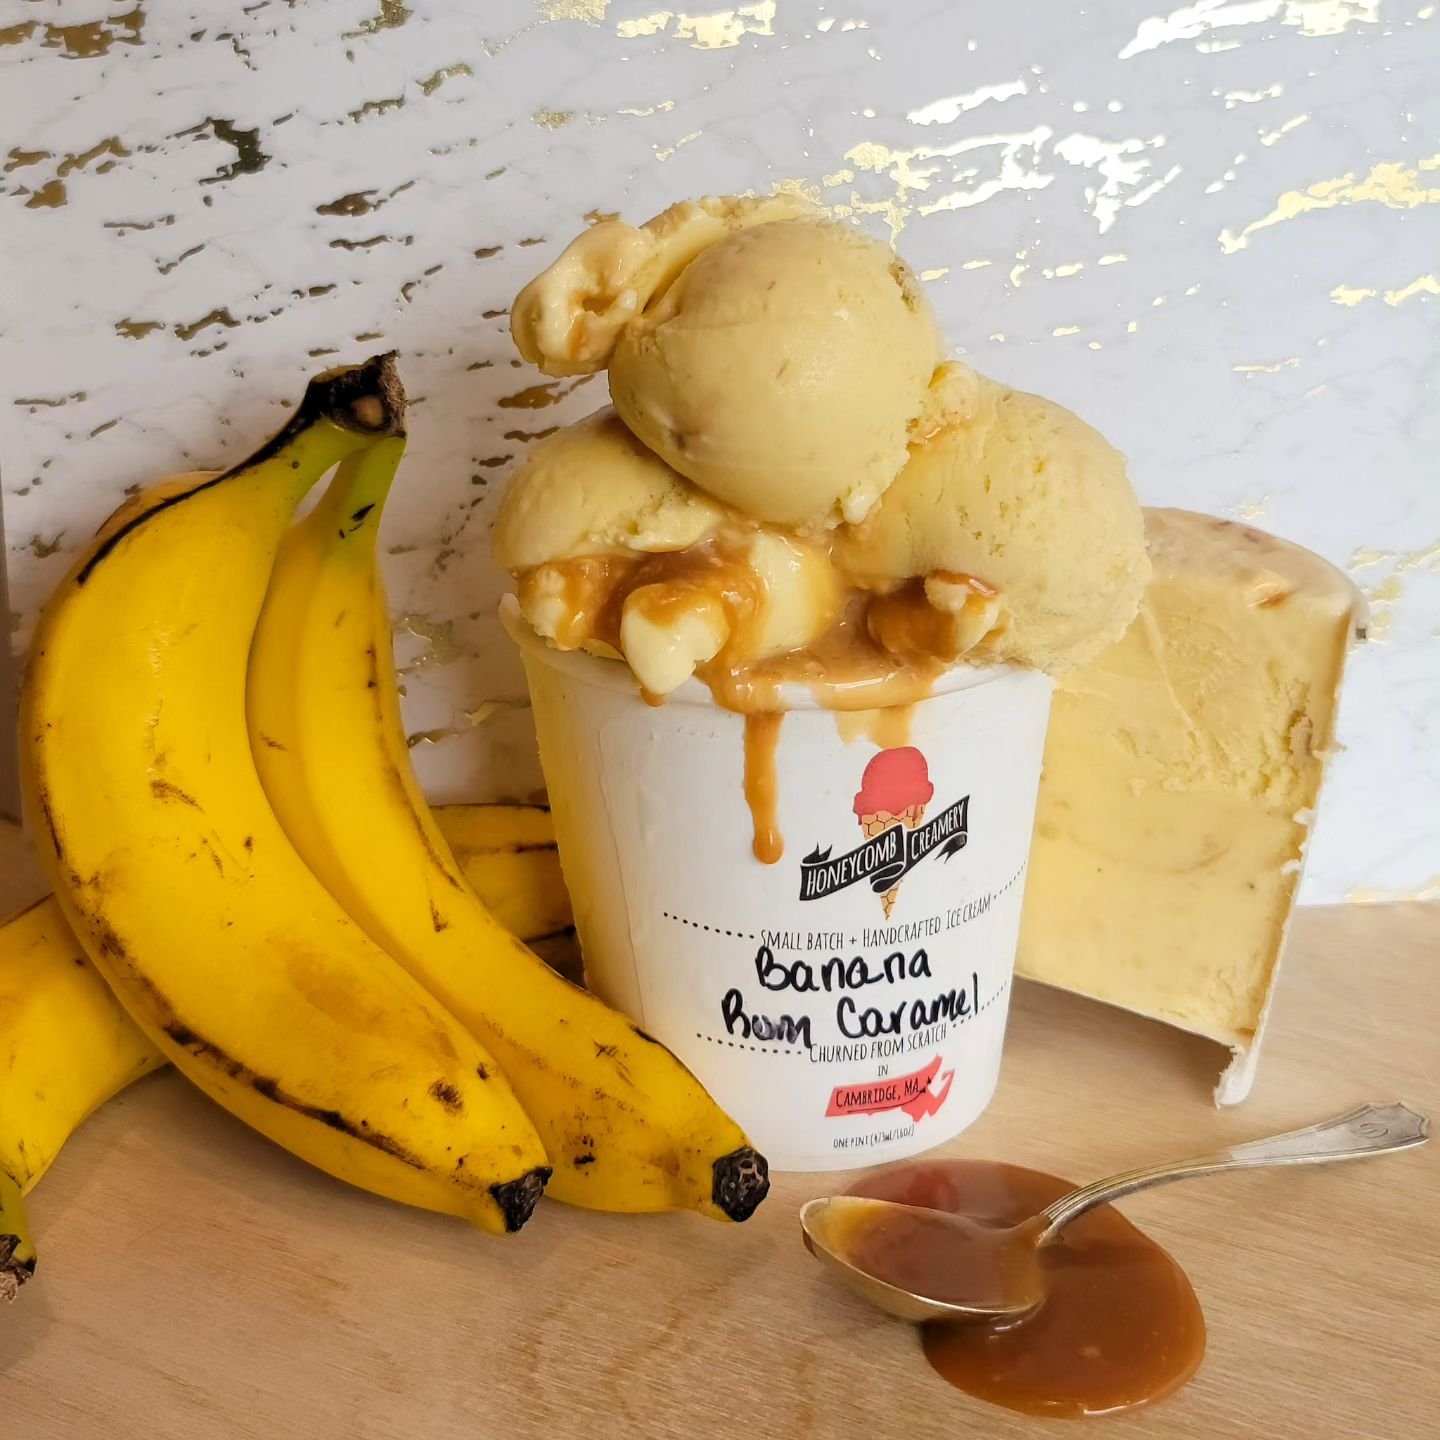 It's about time we talk about this tasty scoop!😋

BANANA RUM CARAMEL is a roasted banana ice cream swirled with ribbons of homemade rum caramel. The bananas we roast in-house lends this flavor a delightful combo of fruity and warm, and the gooey car